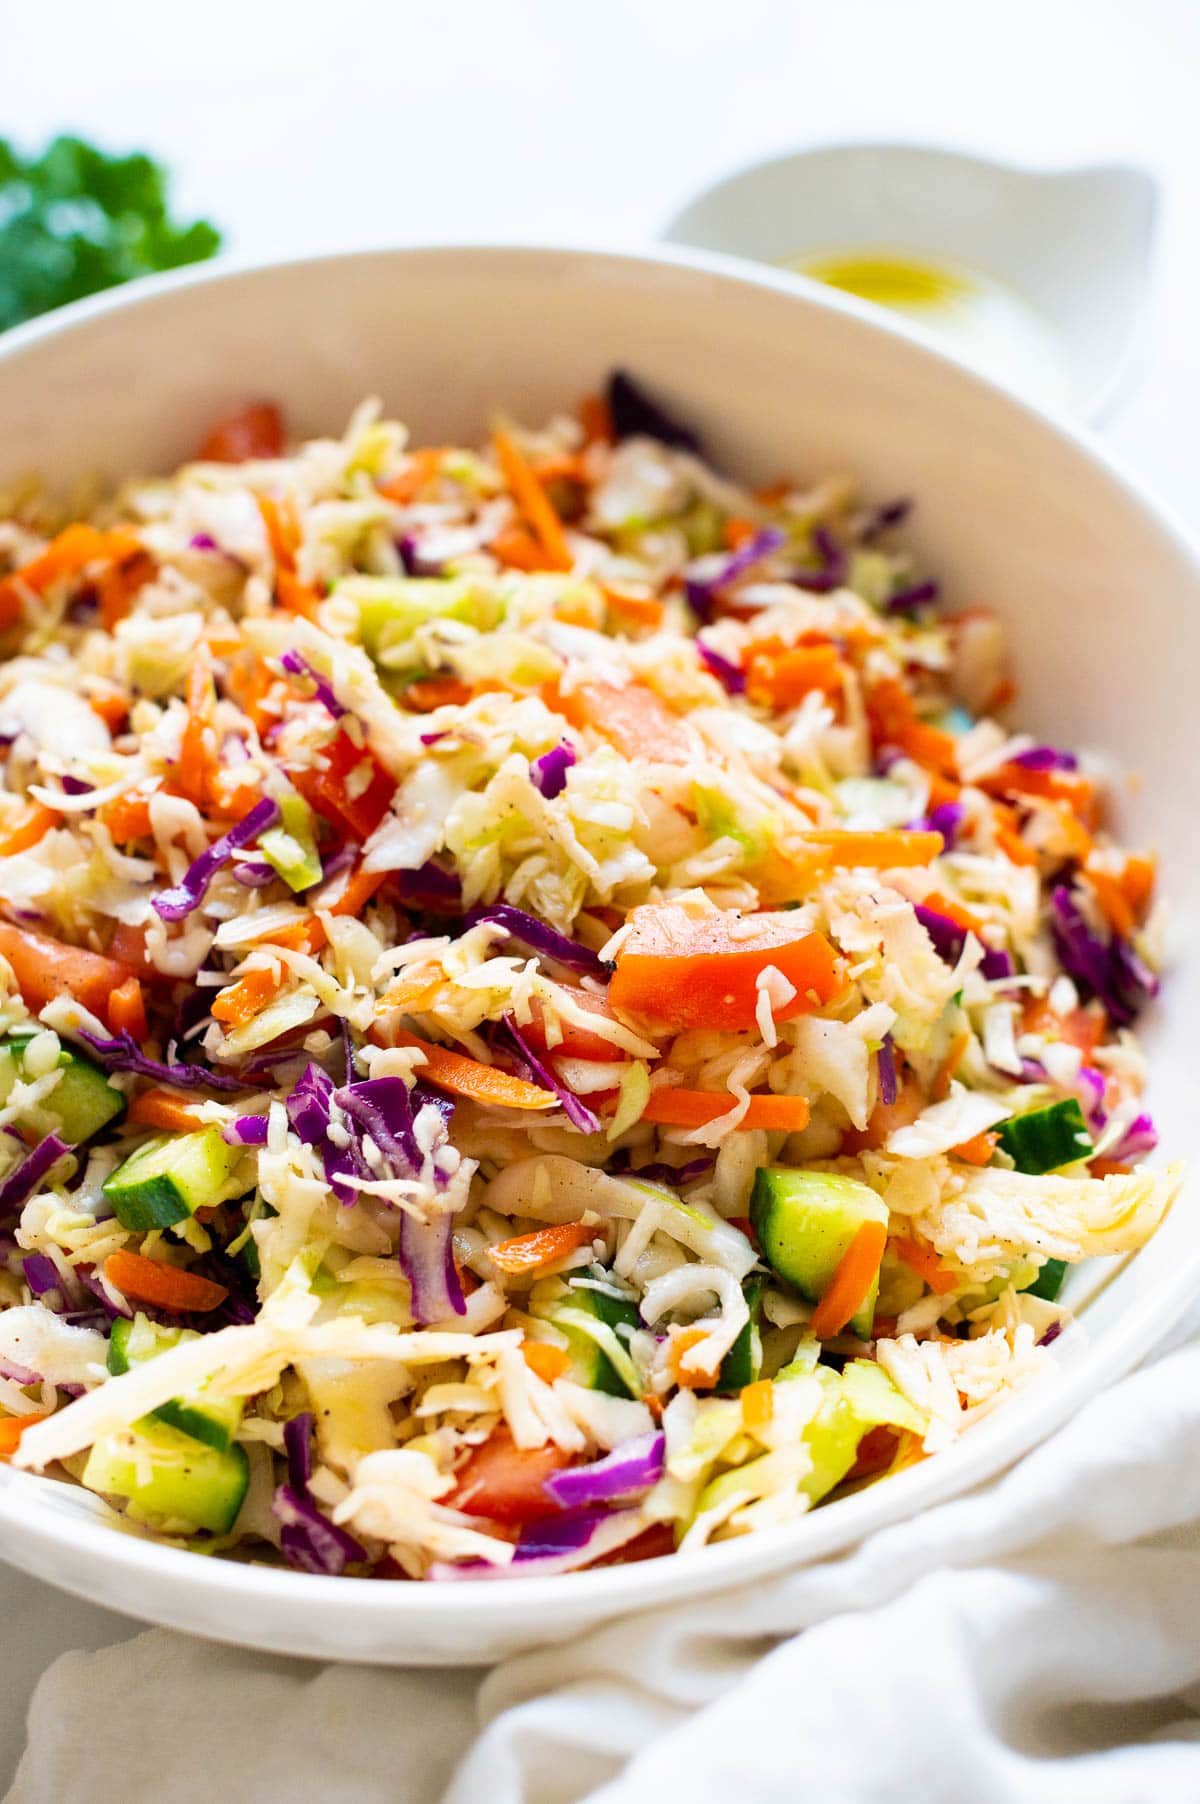 Side view on a bowl of coleslaw with red and green cabbage, carrots, tomatoes and cucumbers.